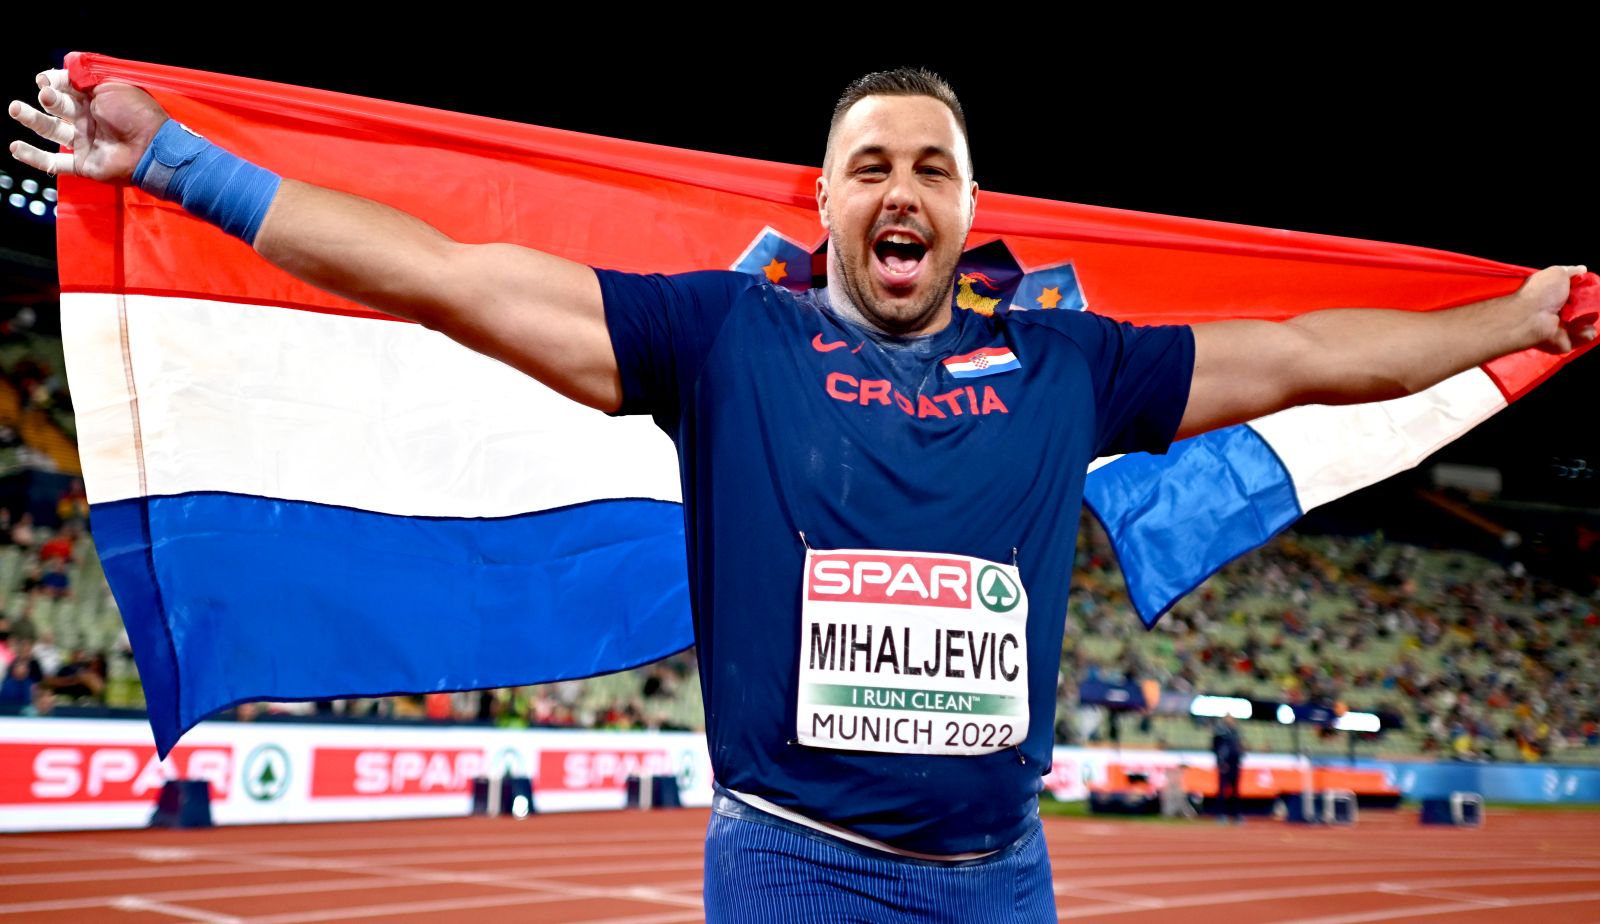 epa10123229 Filip Mihaljevic of Croatia celebrates after winning the men's Shot Put final during the Athletics events at the European Championships Munich 2022, Munich, Germany, 15 August 2022. The championships will feature nine Olympic sports, Athletics, Beach Volleyball, Canoe Sprint, Cycling, Artistic Gymnastics, Rowing, Sport Climbing, Table Tennis and Triathlon.  EPA/CHRISTIAN BRUNA